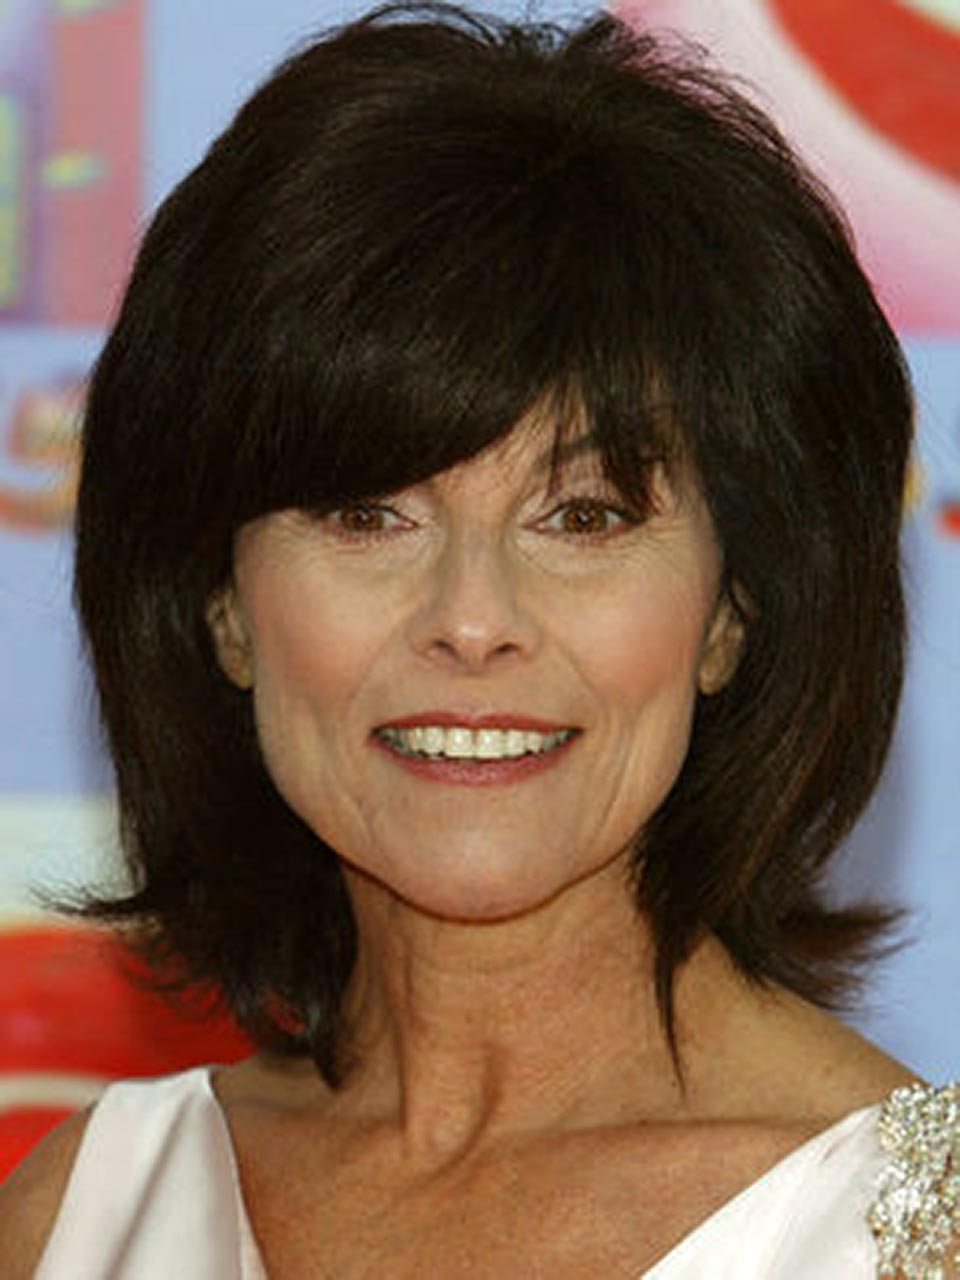 Vintage Film Stars Topless - Adrienne Barbeau Nude Pics â€” This Actress Had Huge Tits ...